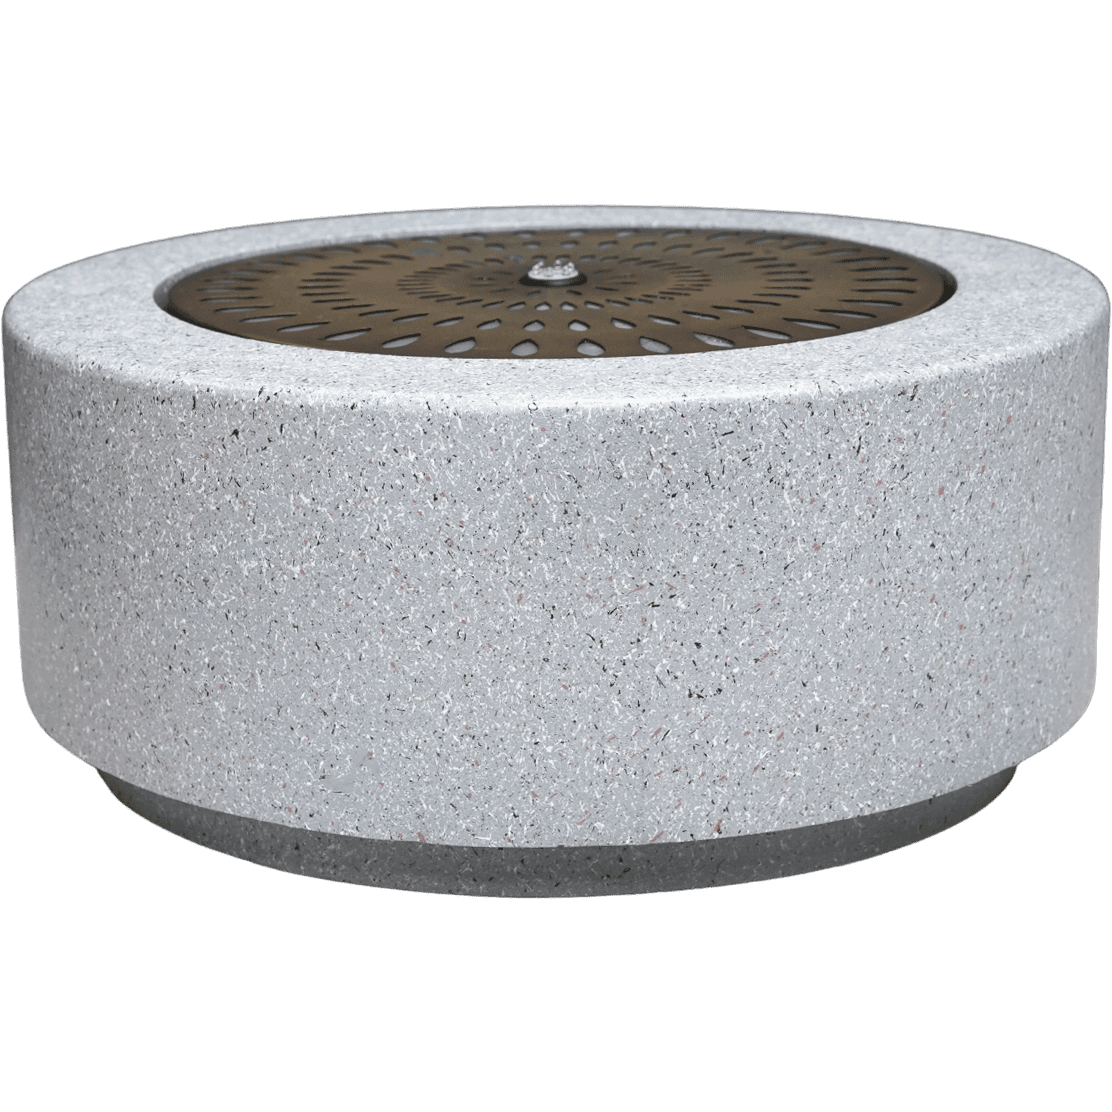 Solis Large Water Feature With Light Display In Terrazzo And Brass